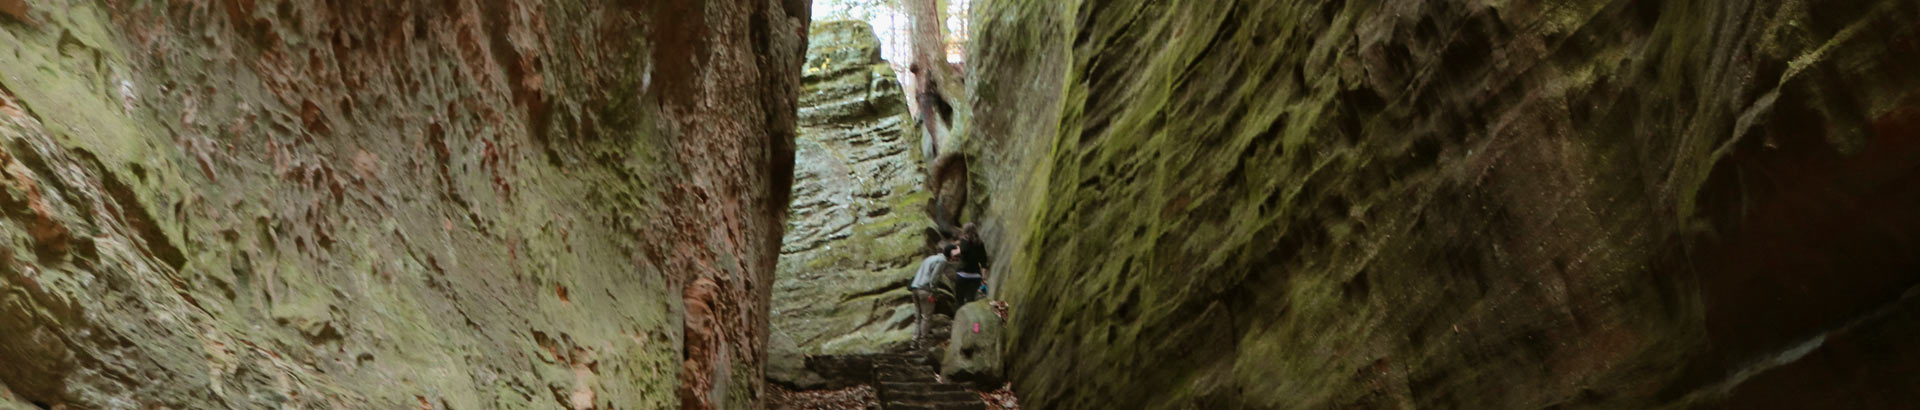 Hiking within Cantwell Cliffs - Hocking Hills State Park.